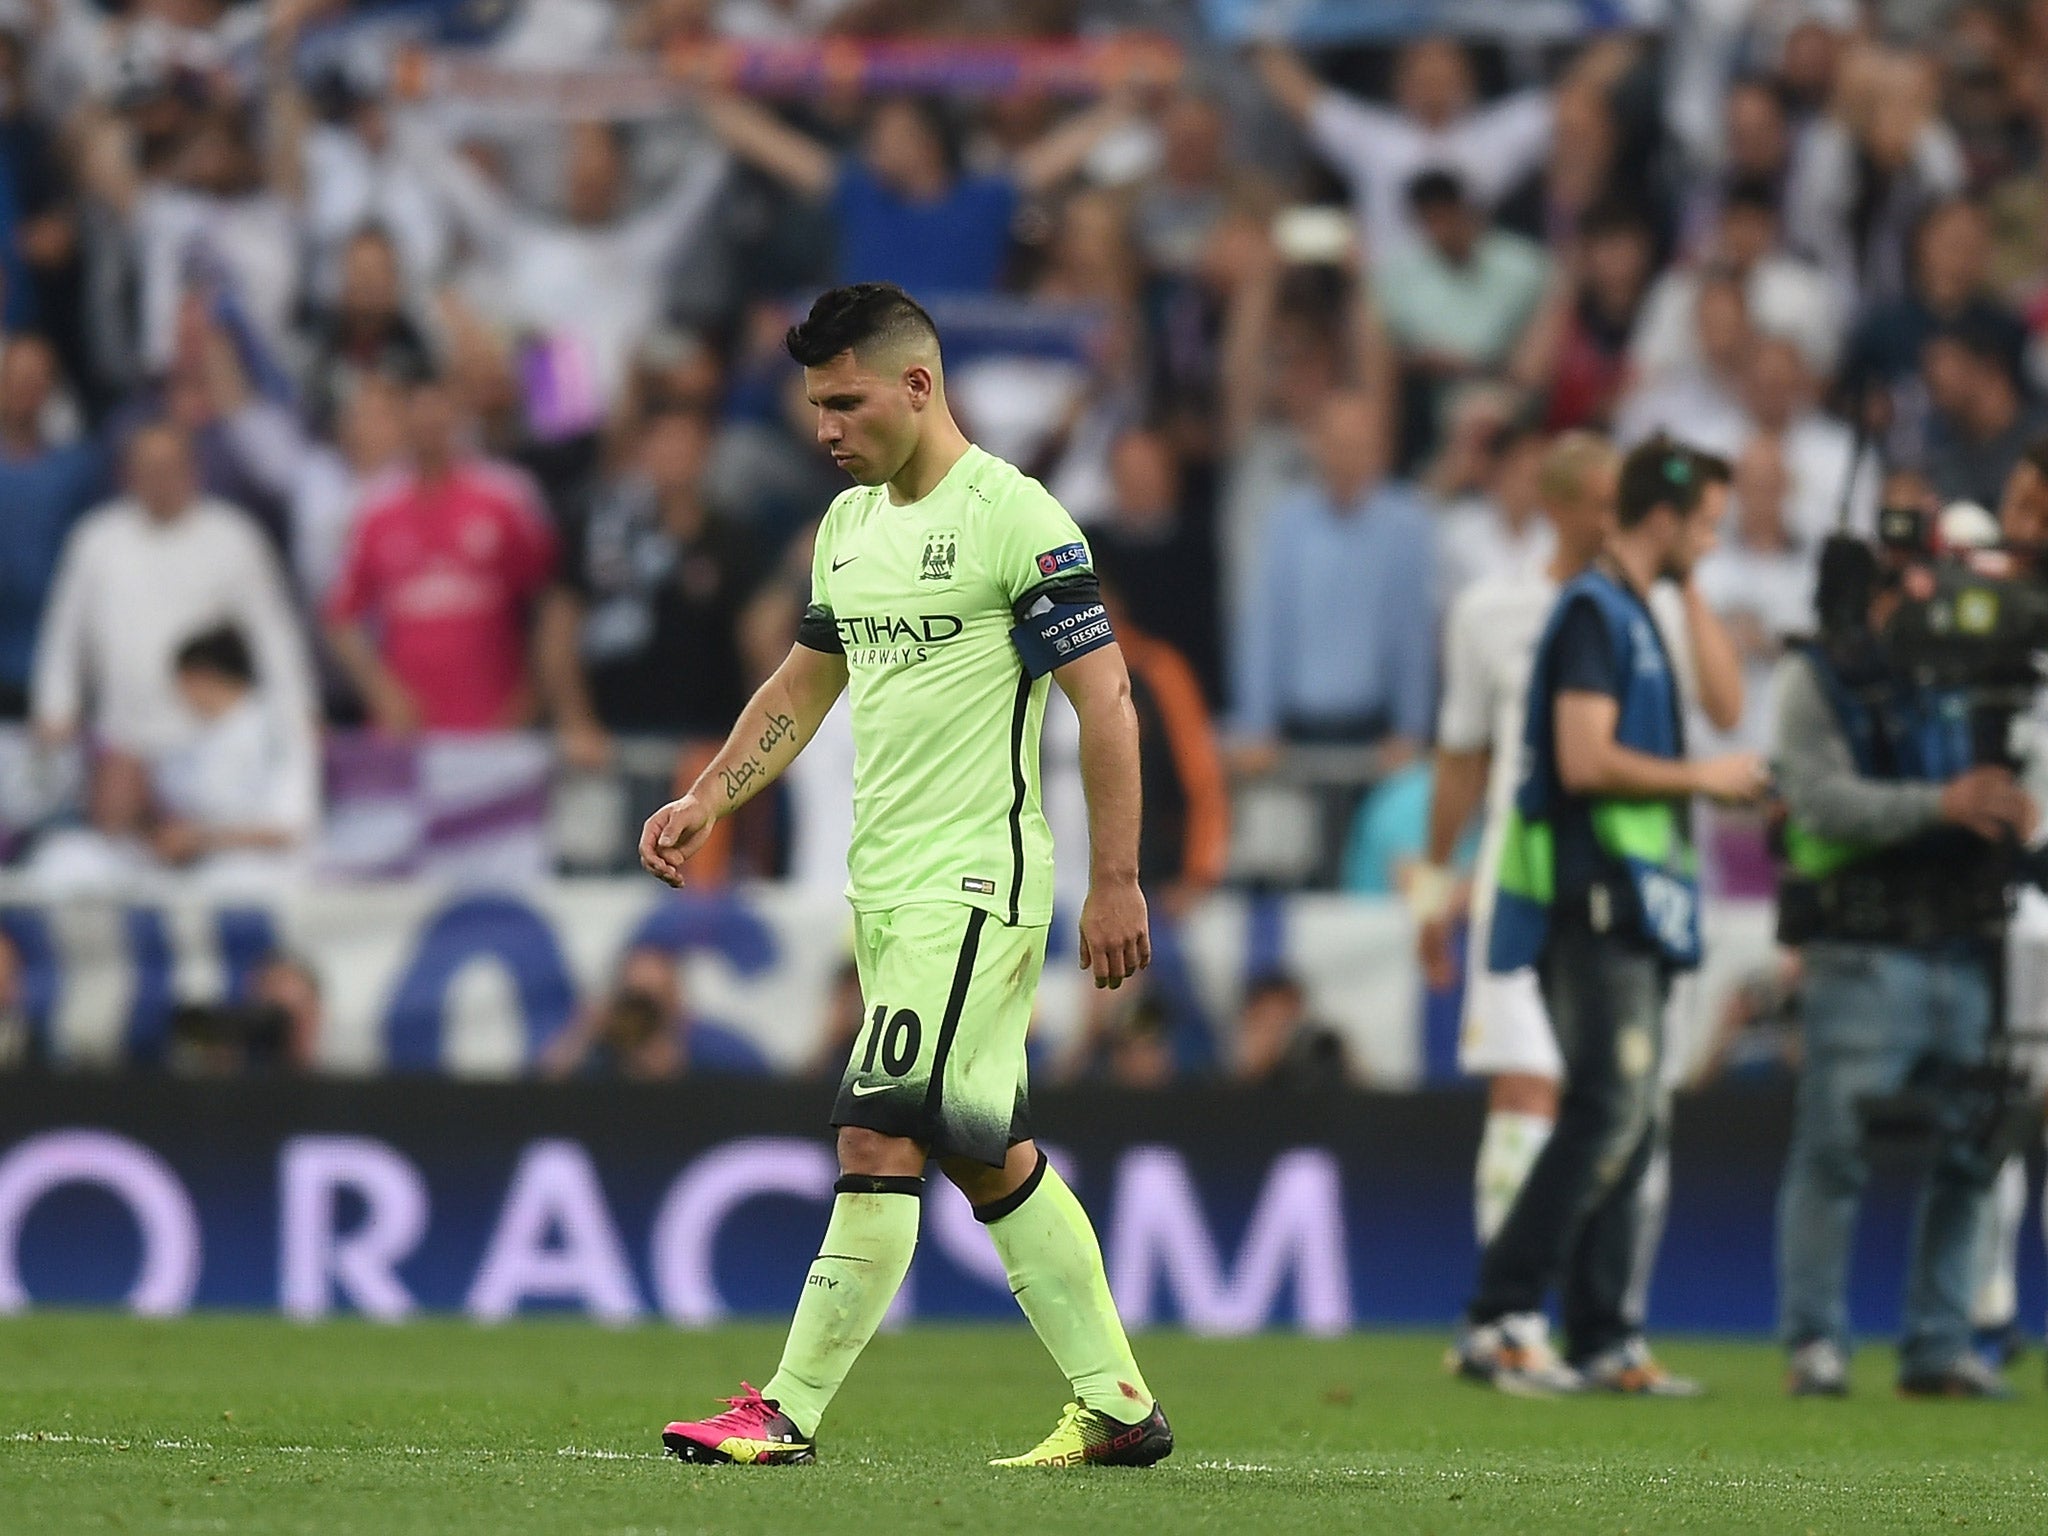 Sergio Aguero is not able to have the same impact when City are forced to play wide